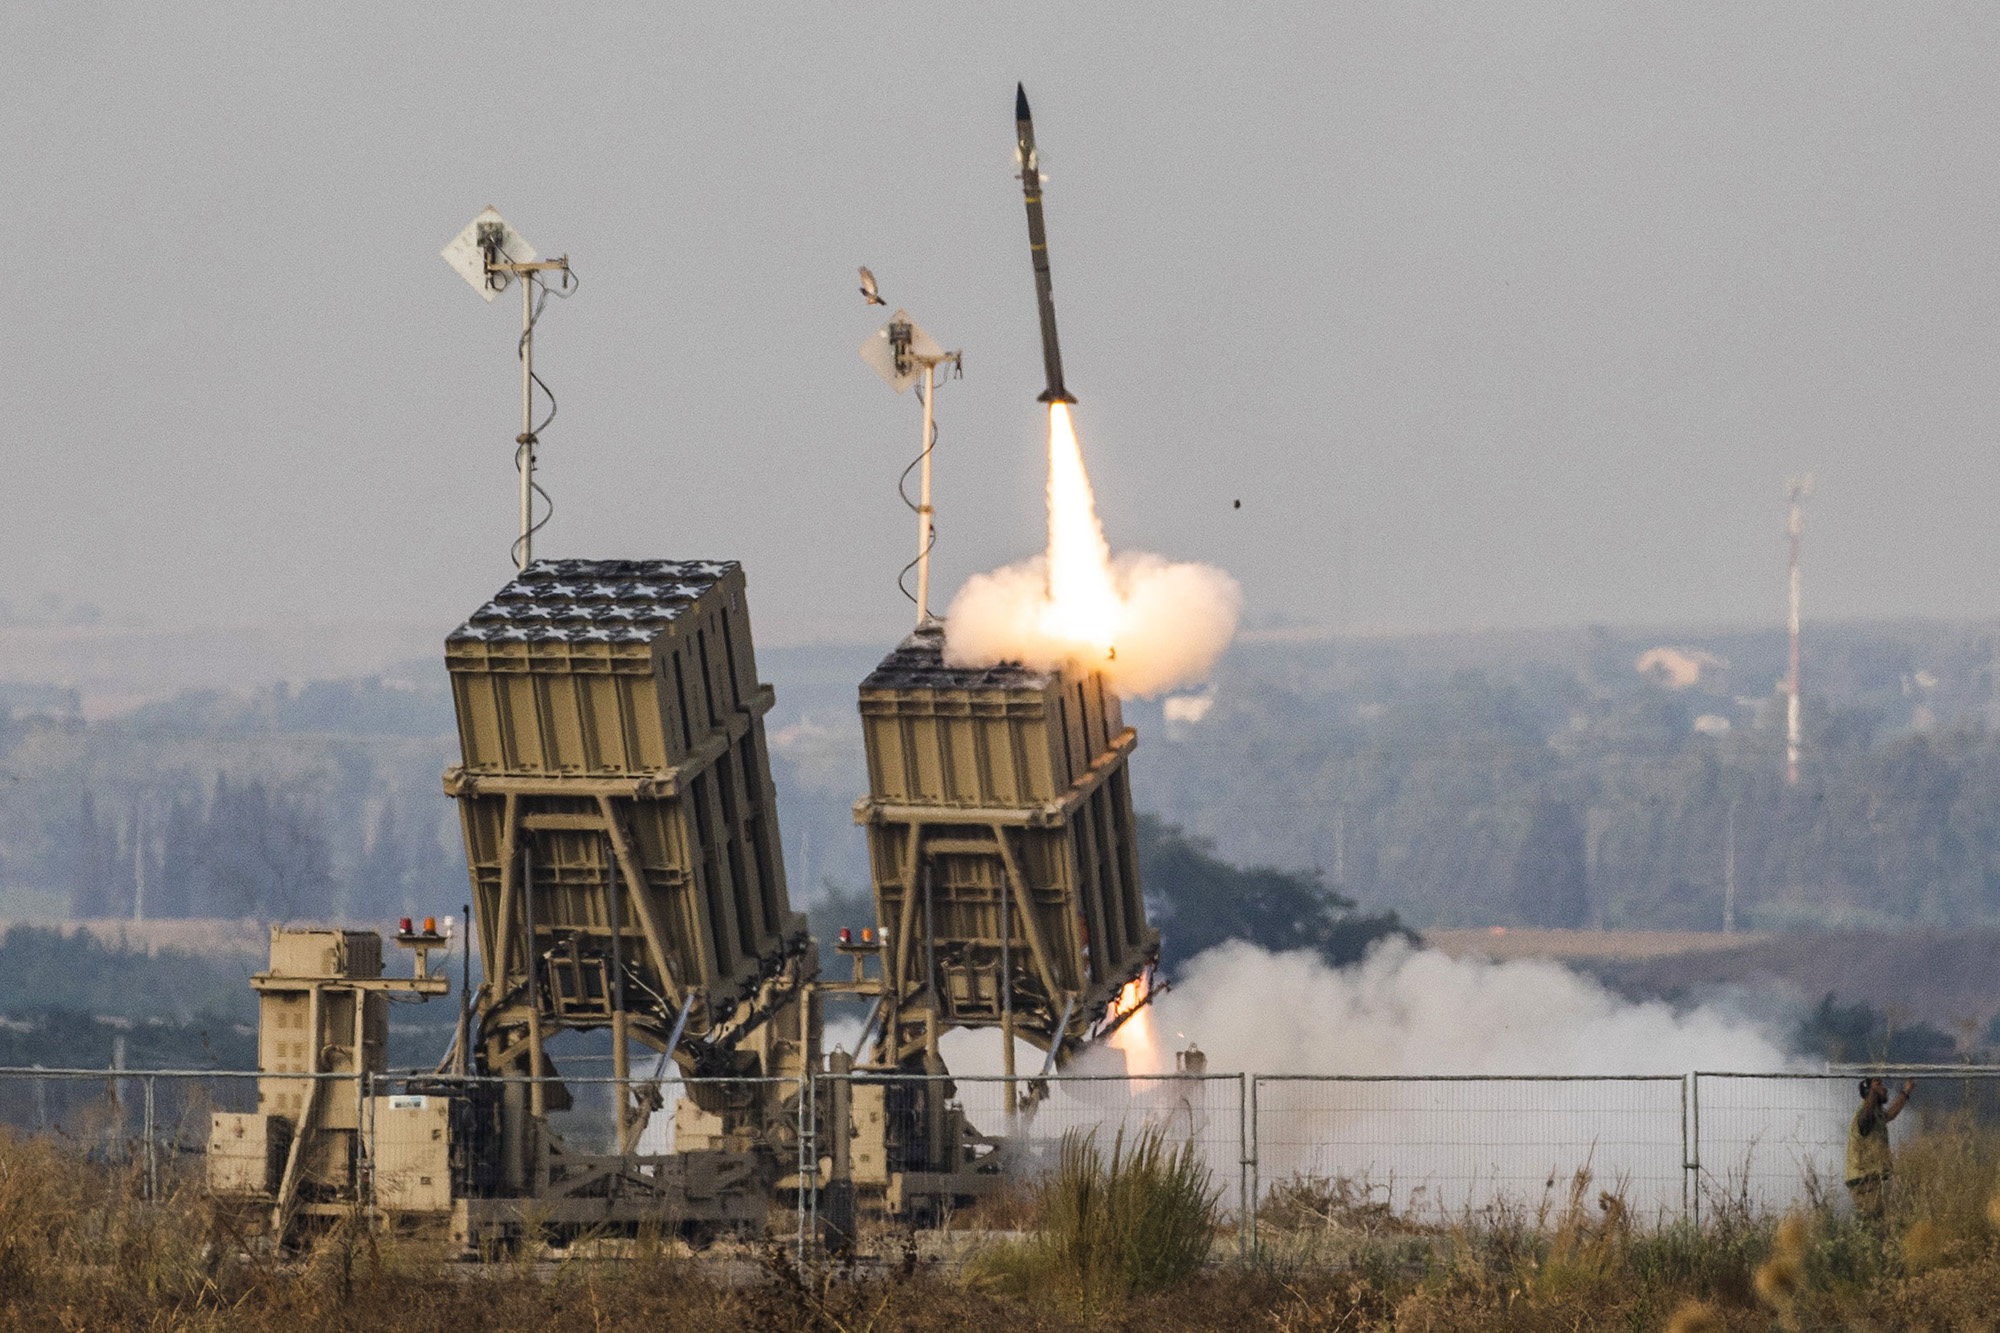 The Iron Dome anti-missile system fires an interceptor missile as rockets are launched from Gaza towards Israel on August 6, 2022.